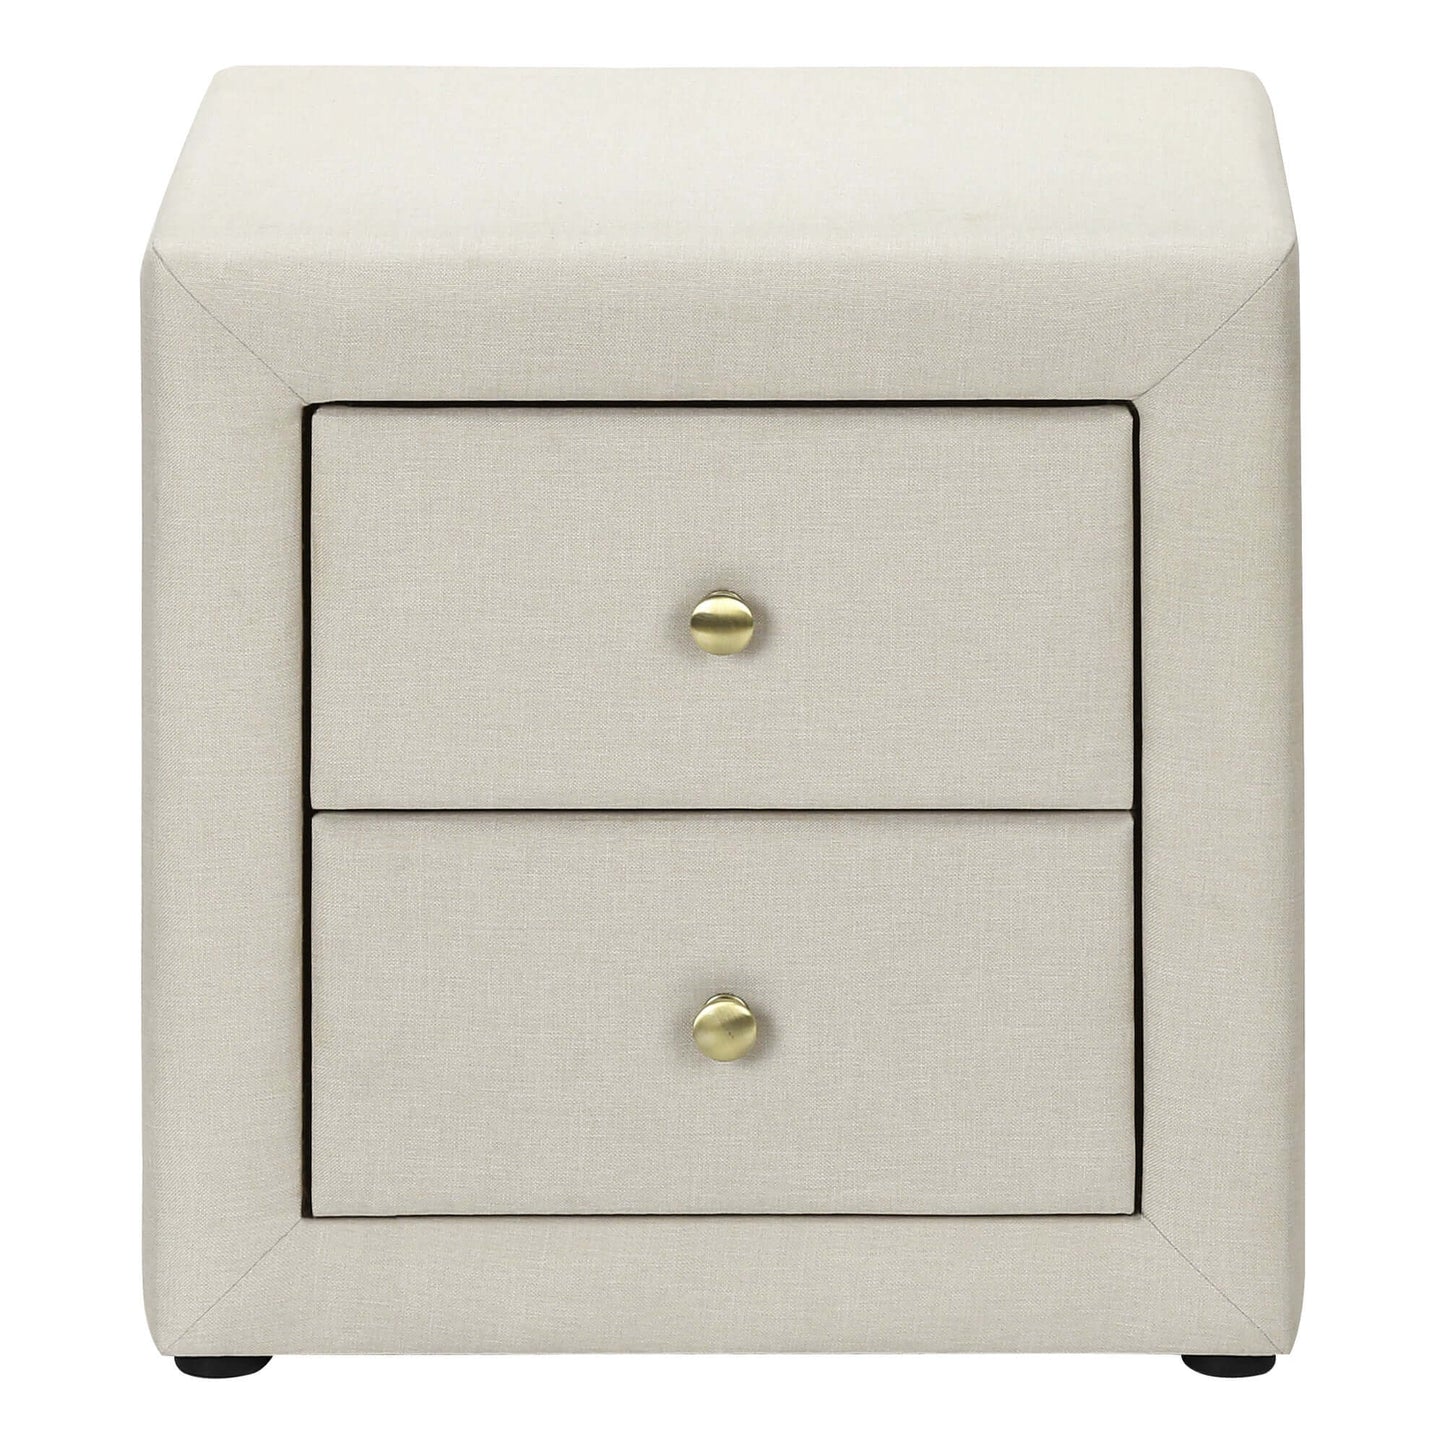 Monarch Specialties - Transitional Nightstand in Beige Linen Fabric Upholstery - I 5605